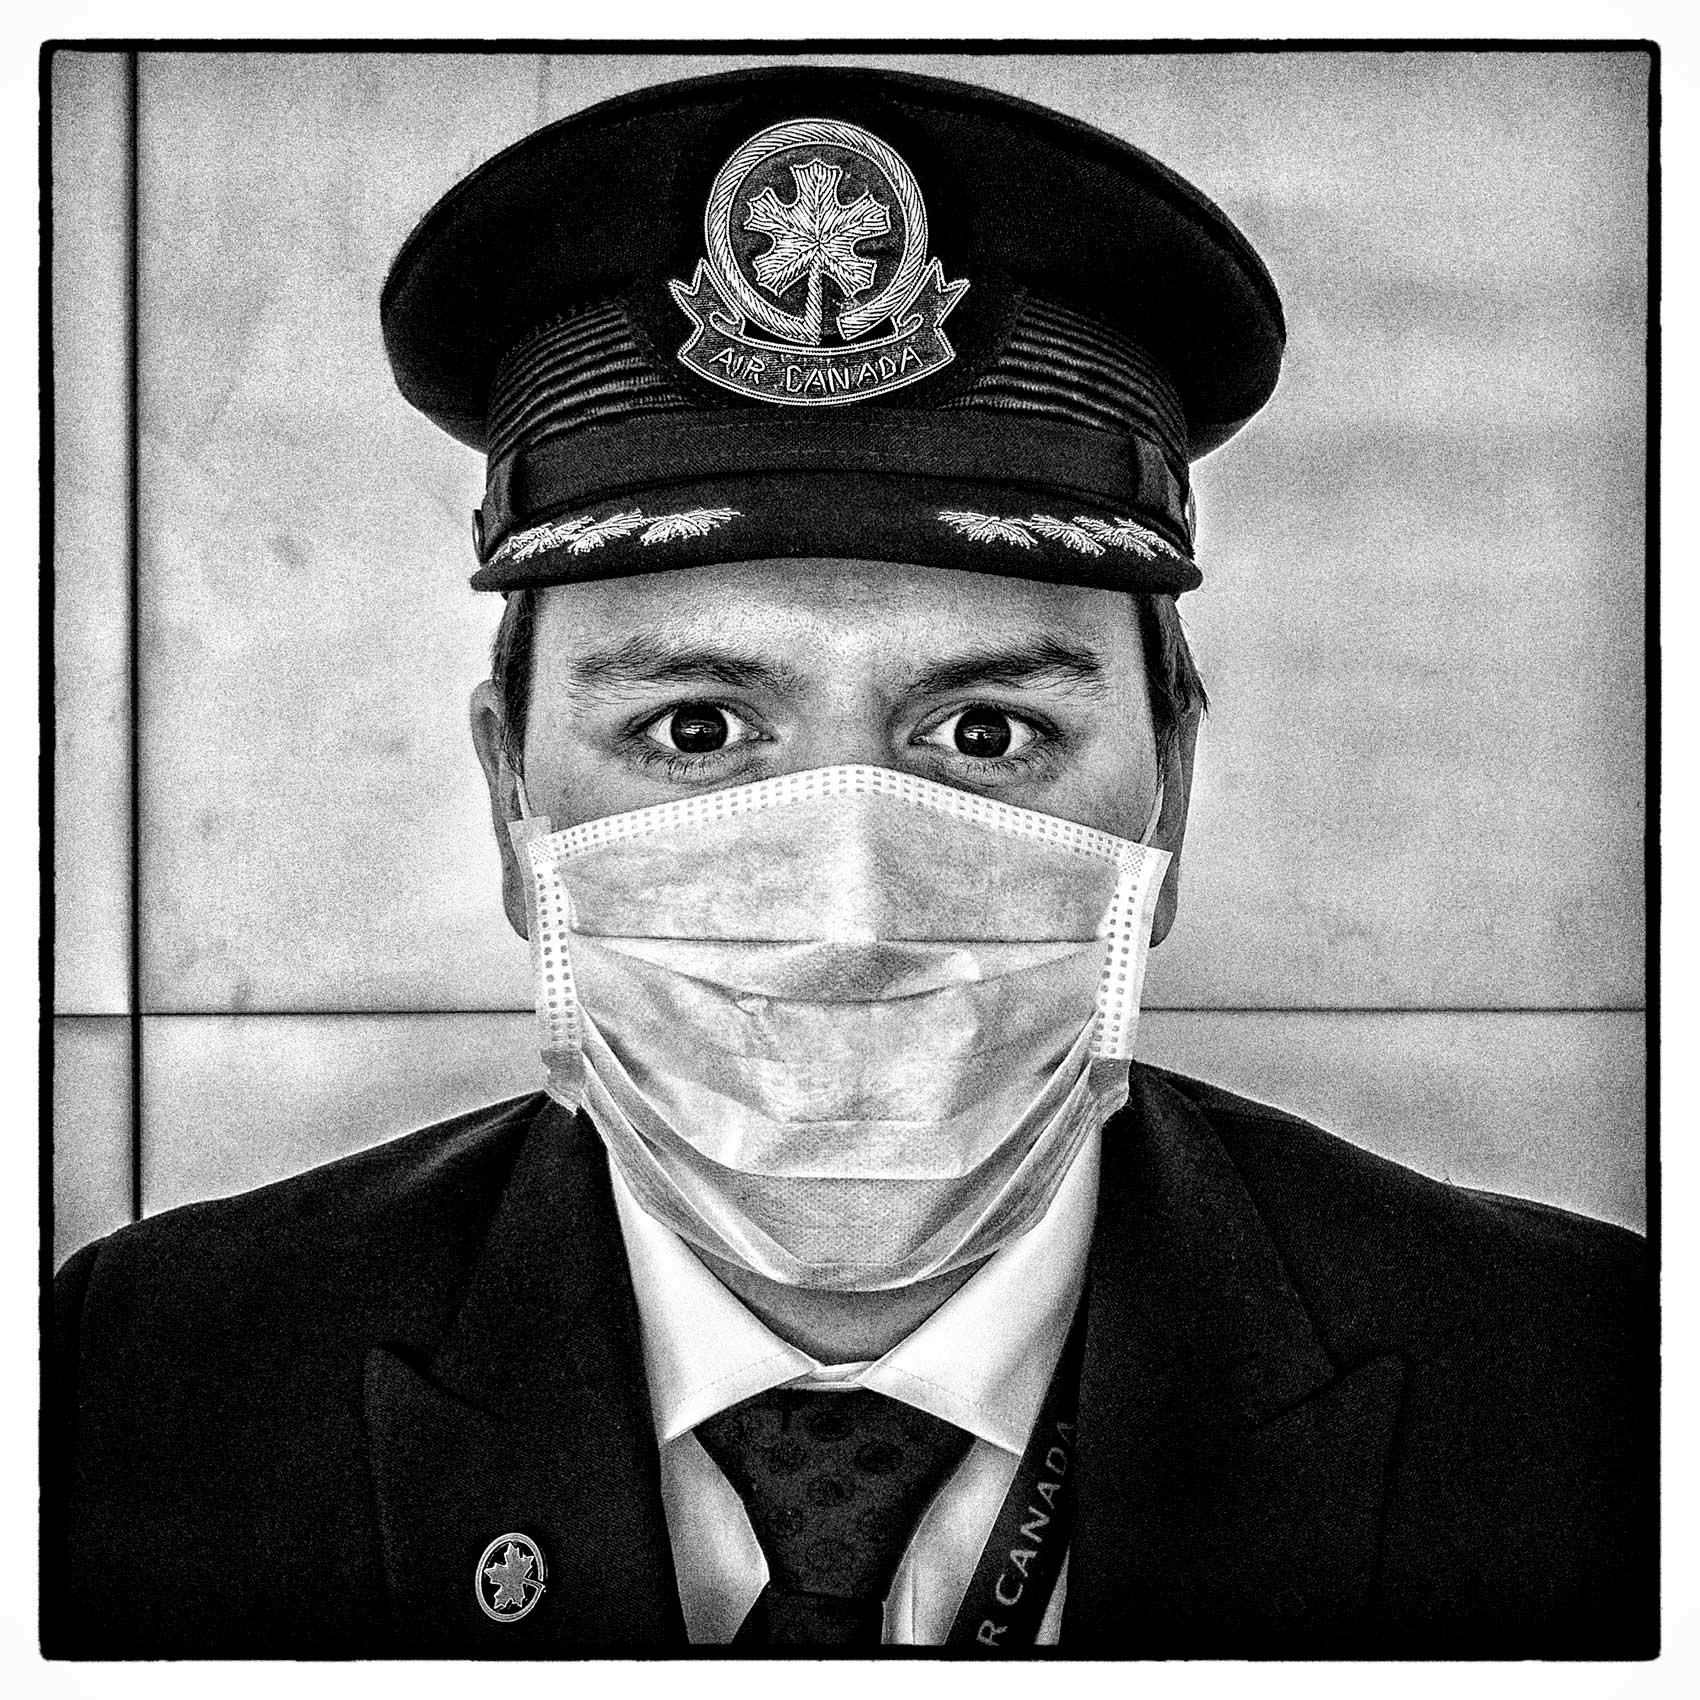 a portrait of a toronto pilot wearing a face mask during the pandemic